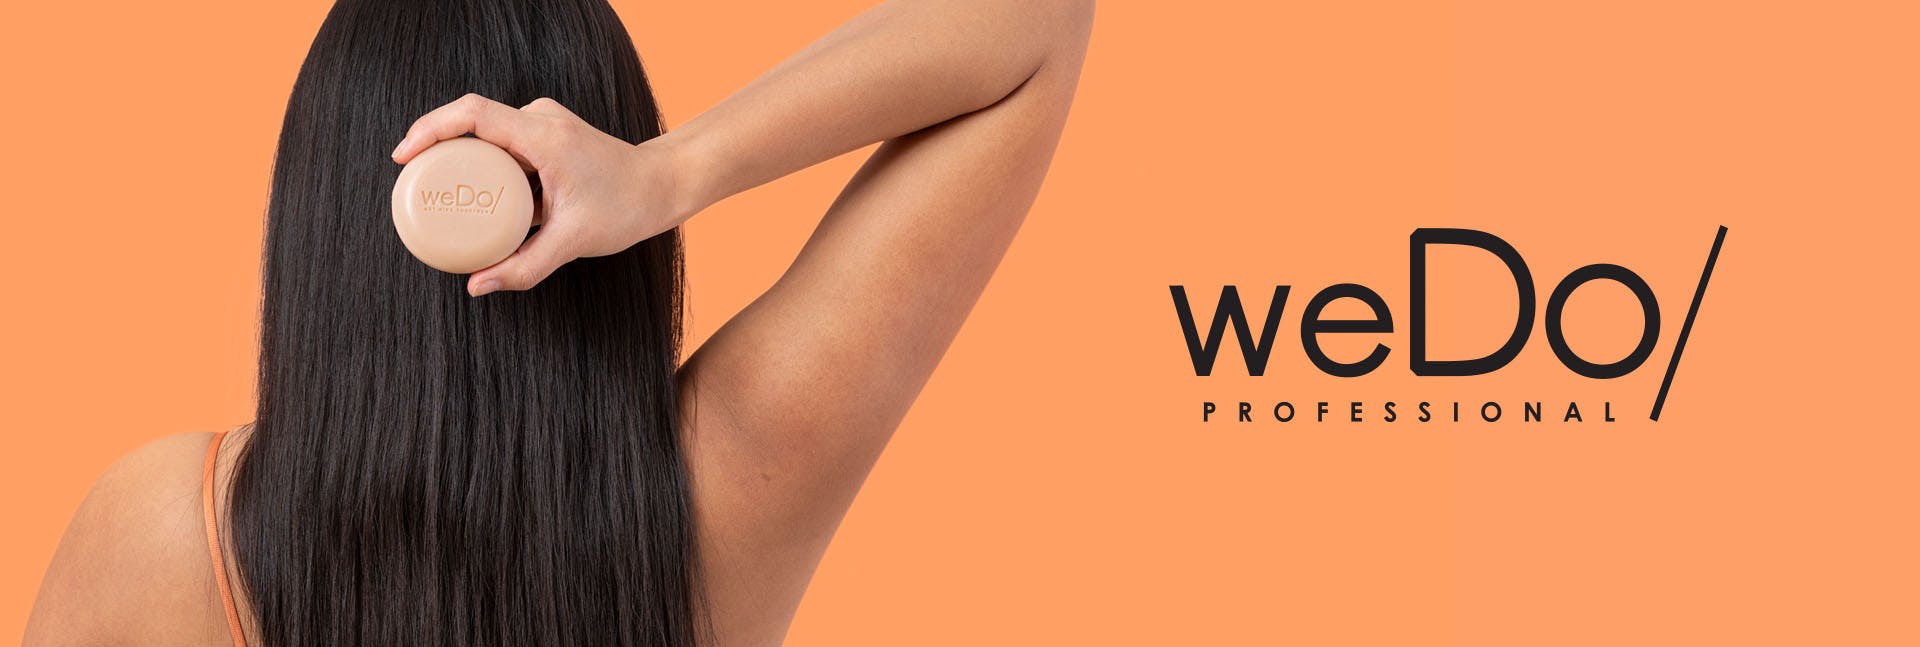 weDo Professional Hair Care Products ​range of recyclable, vegan hair products